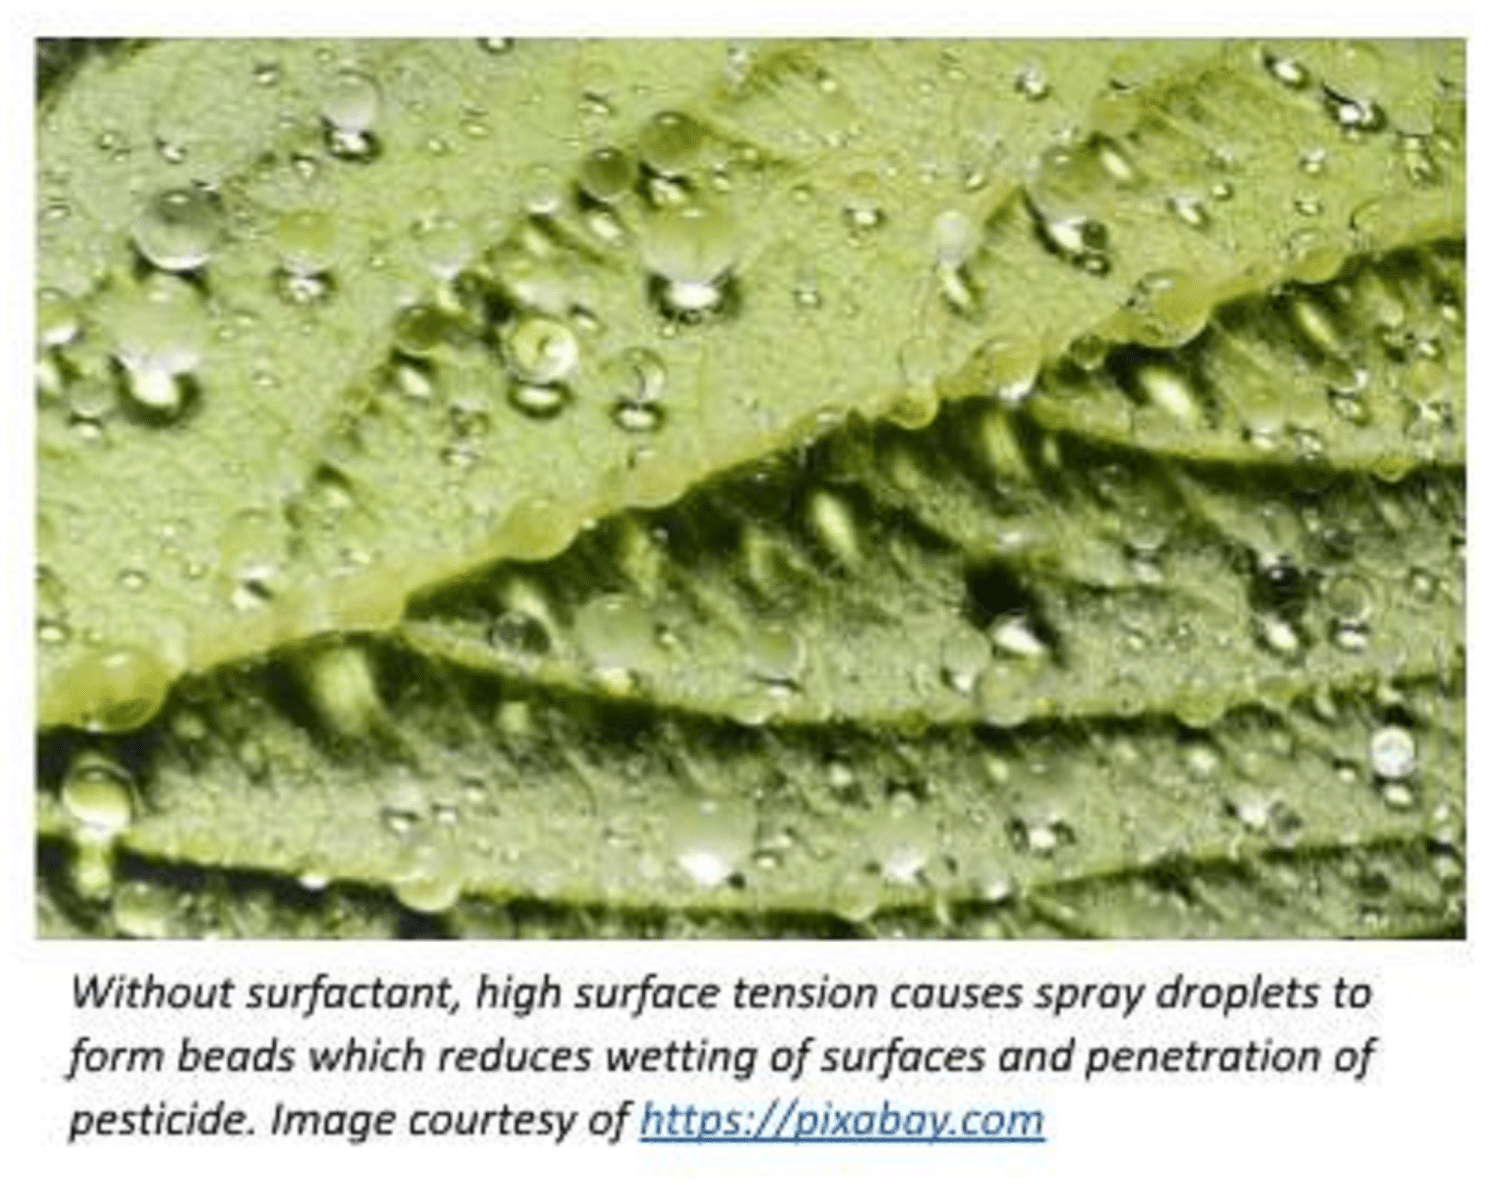 spray droplets formed because of high surface tension